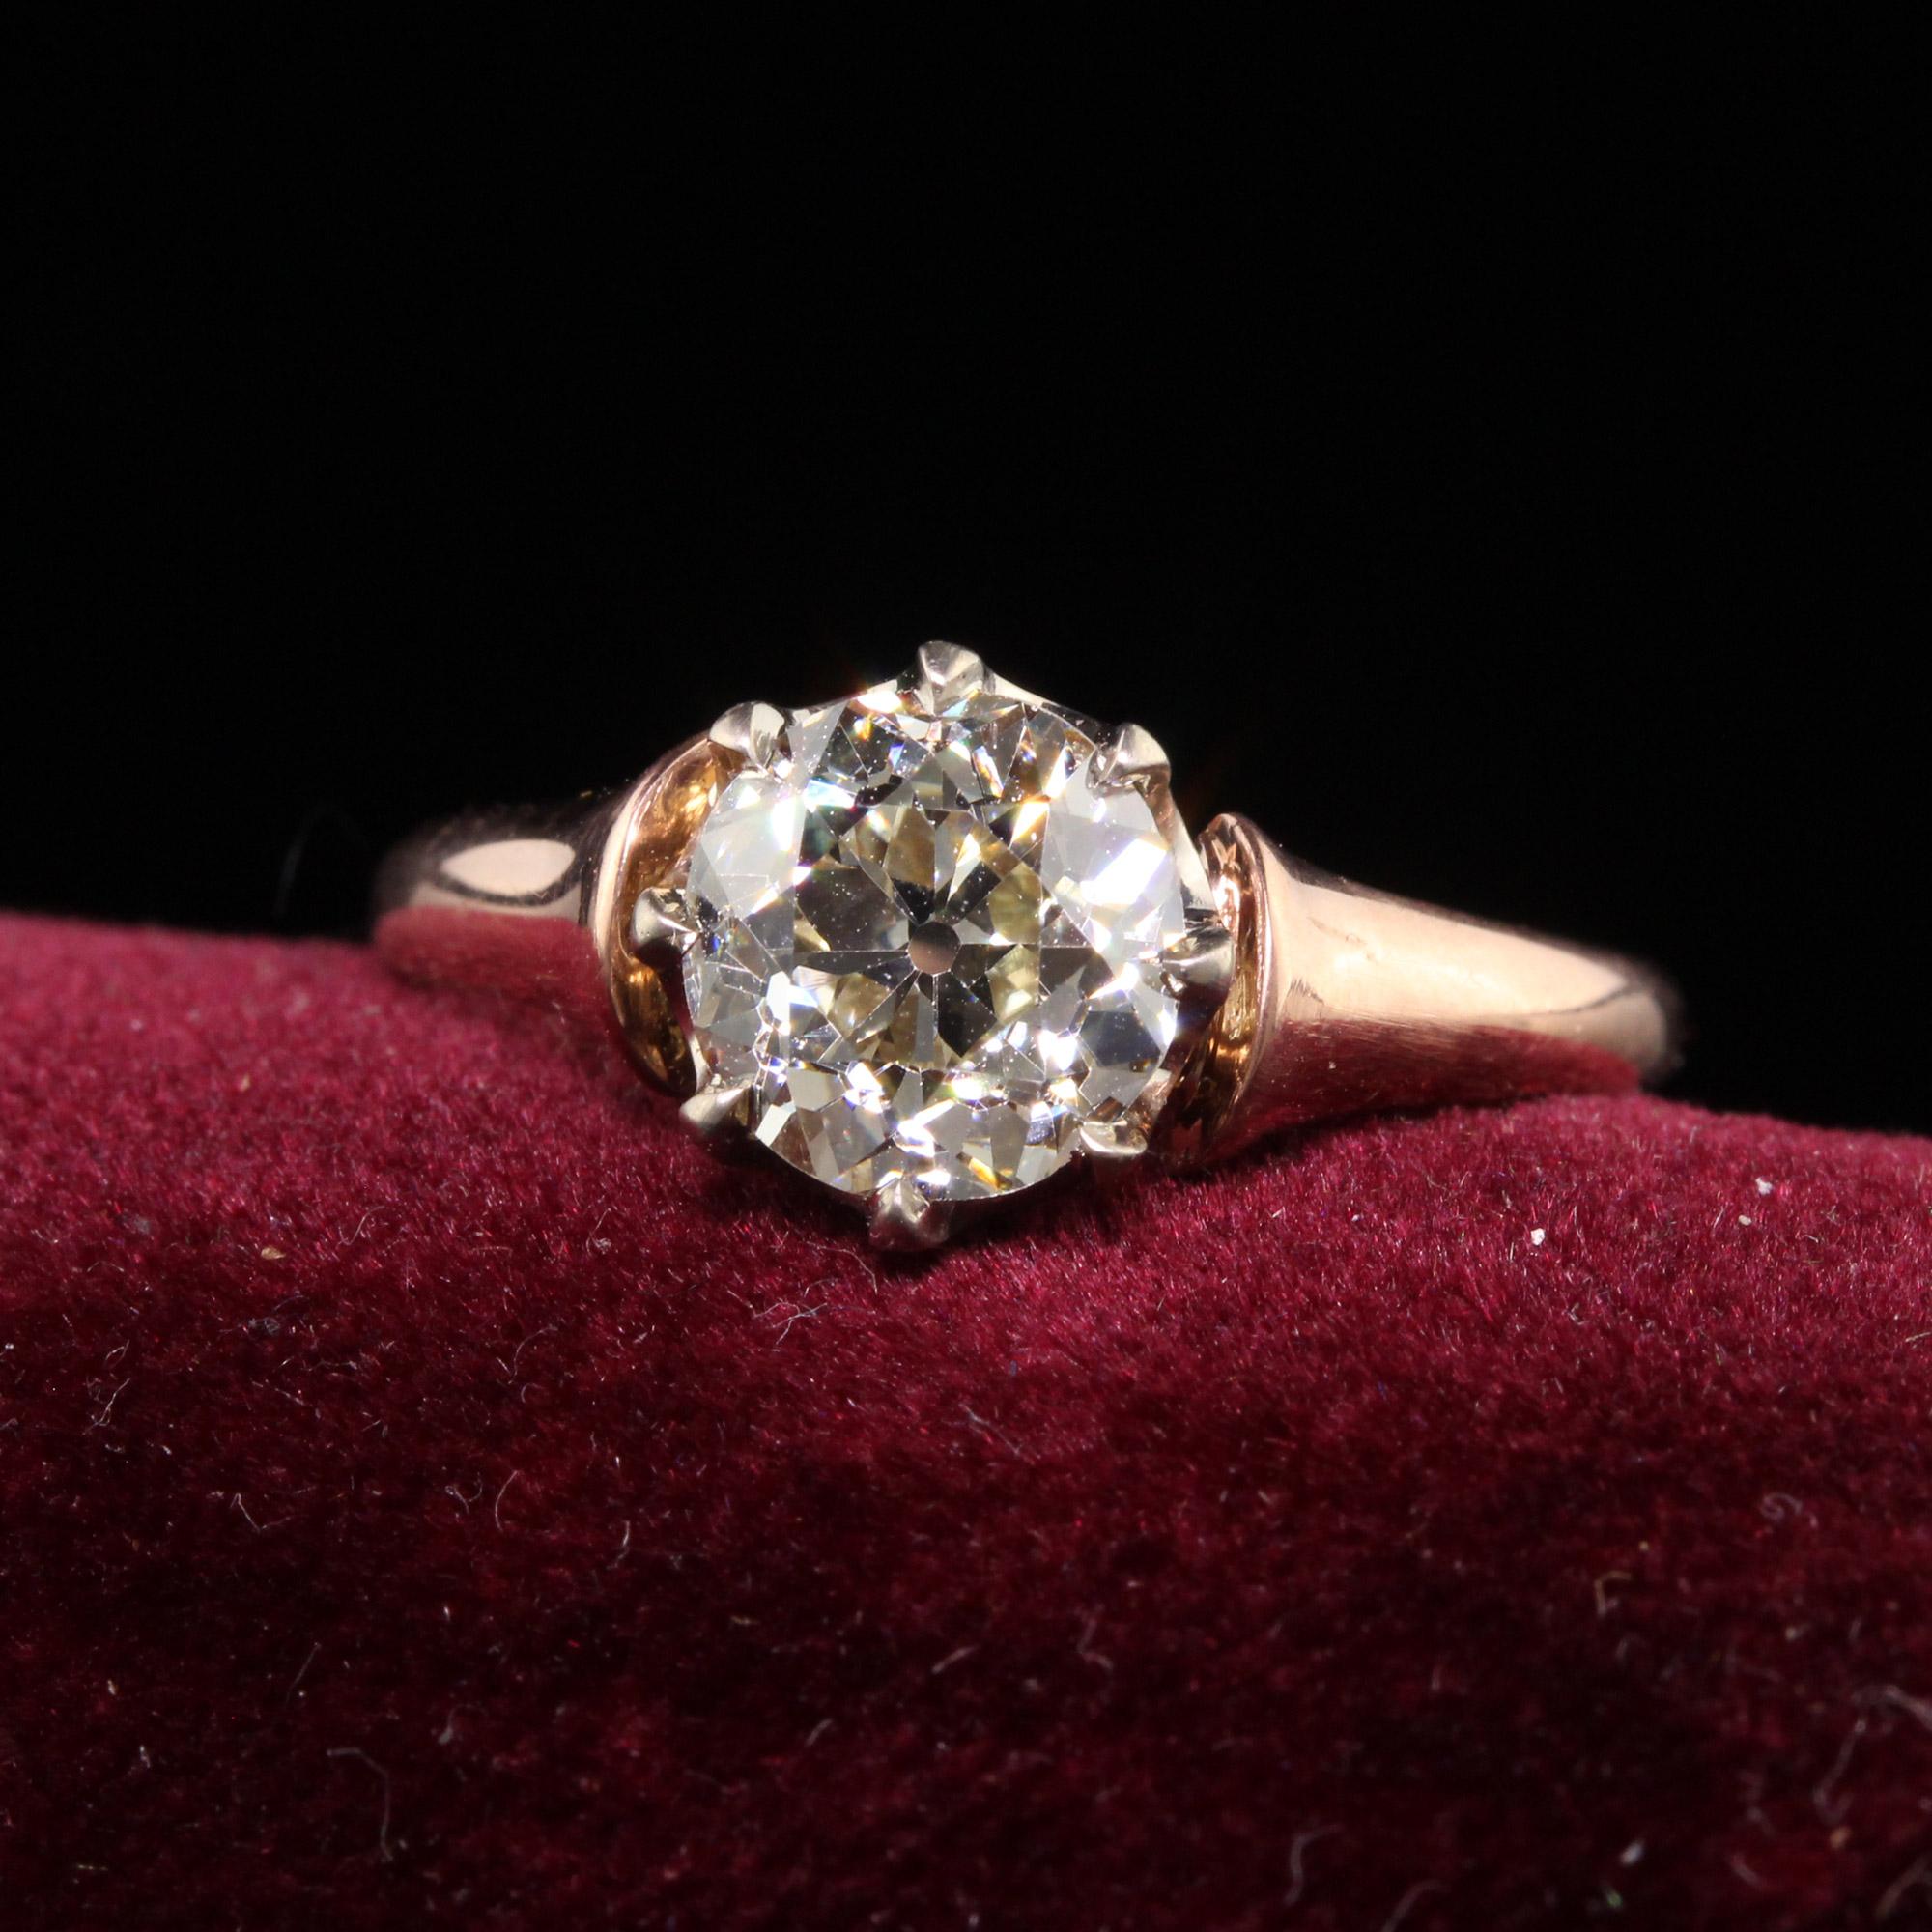 Beautiful Antique Art Deco 18K Rose Gold Old European Cut Diamond Engagement Ring. This gorgeous engagement ring is crafted in 18k rose gold and a 18k white gold basket. The center holds a beautiful old european cut diamond and it sits low in this